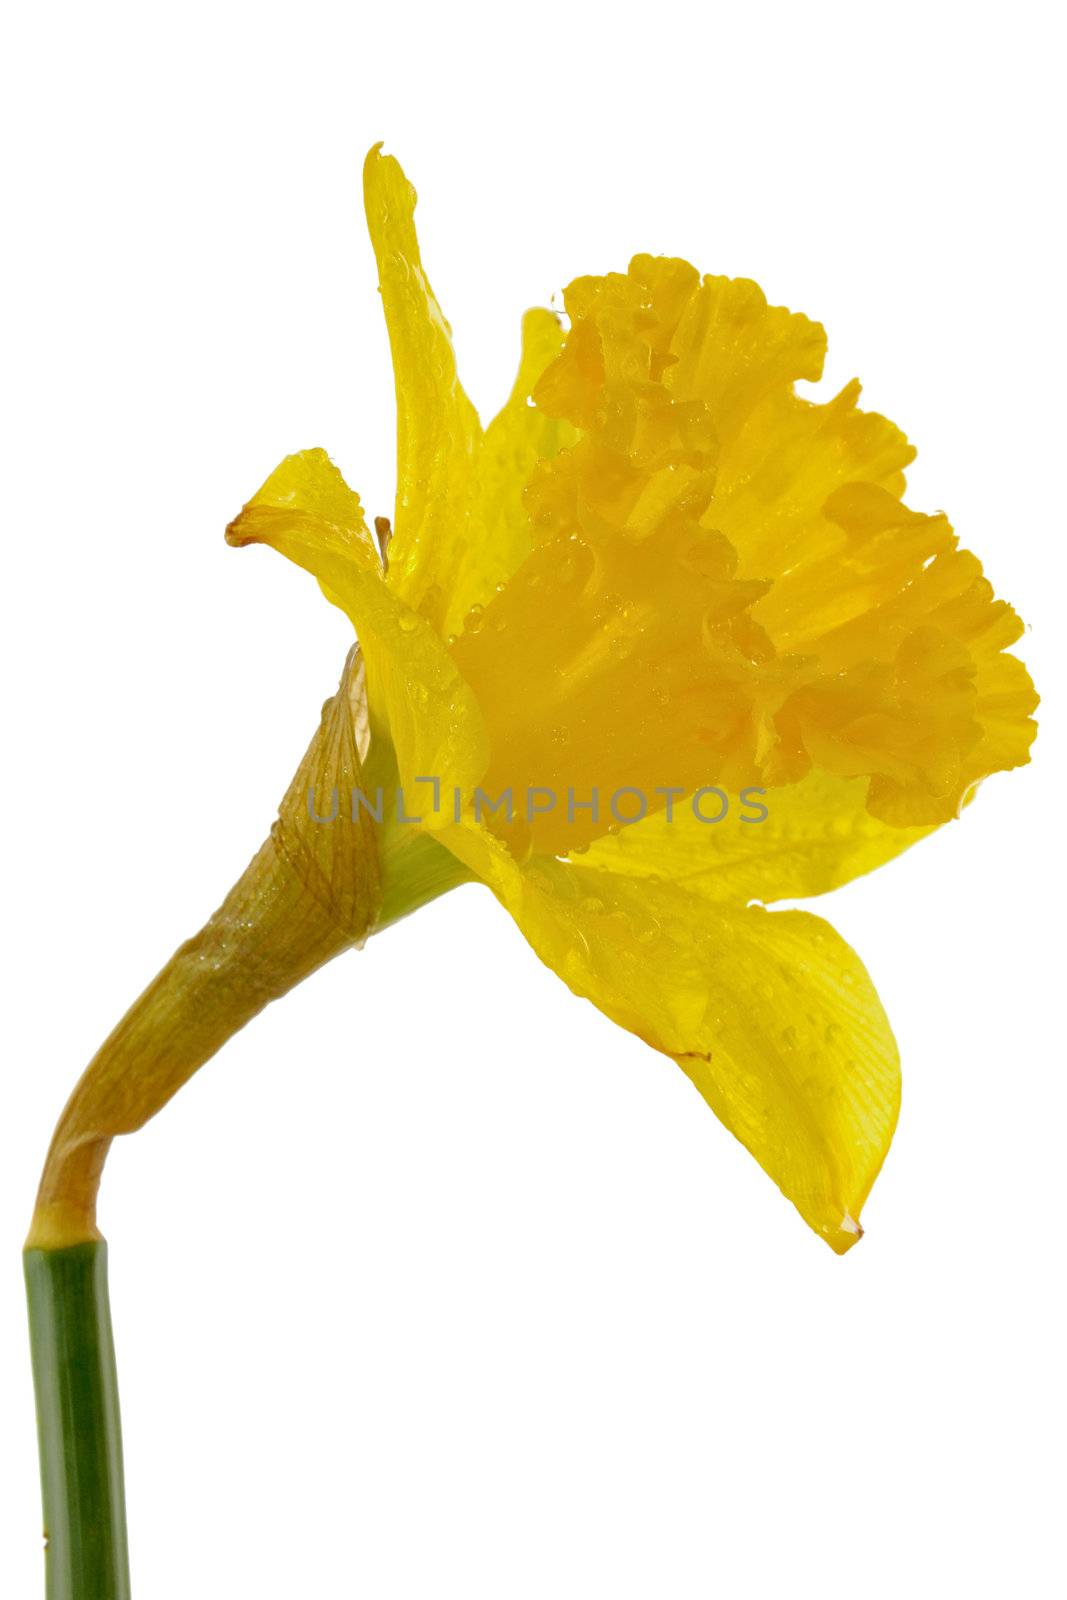 Yellow daffodil with waterdrops. On a clean white background.